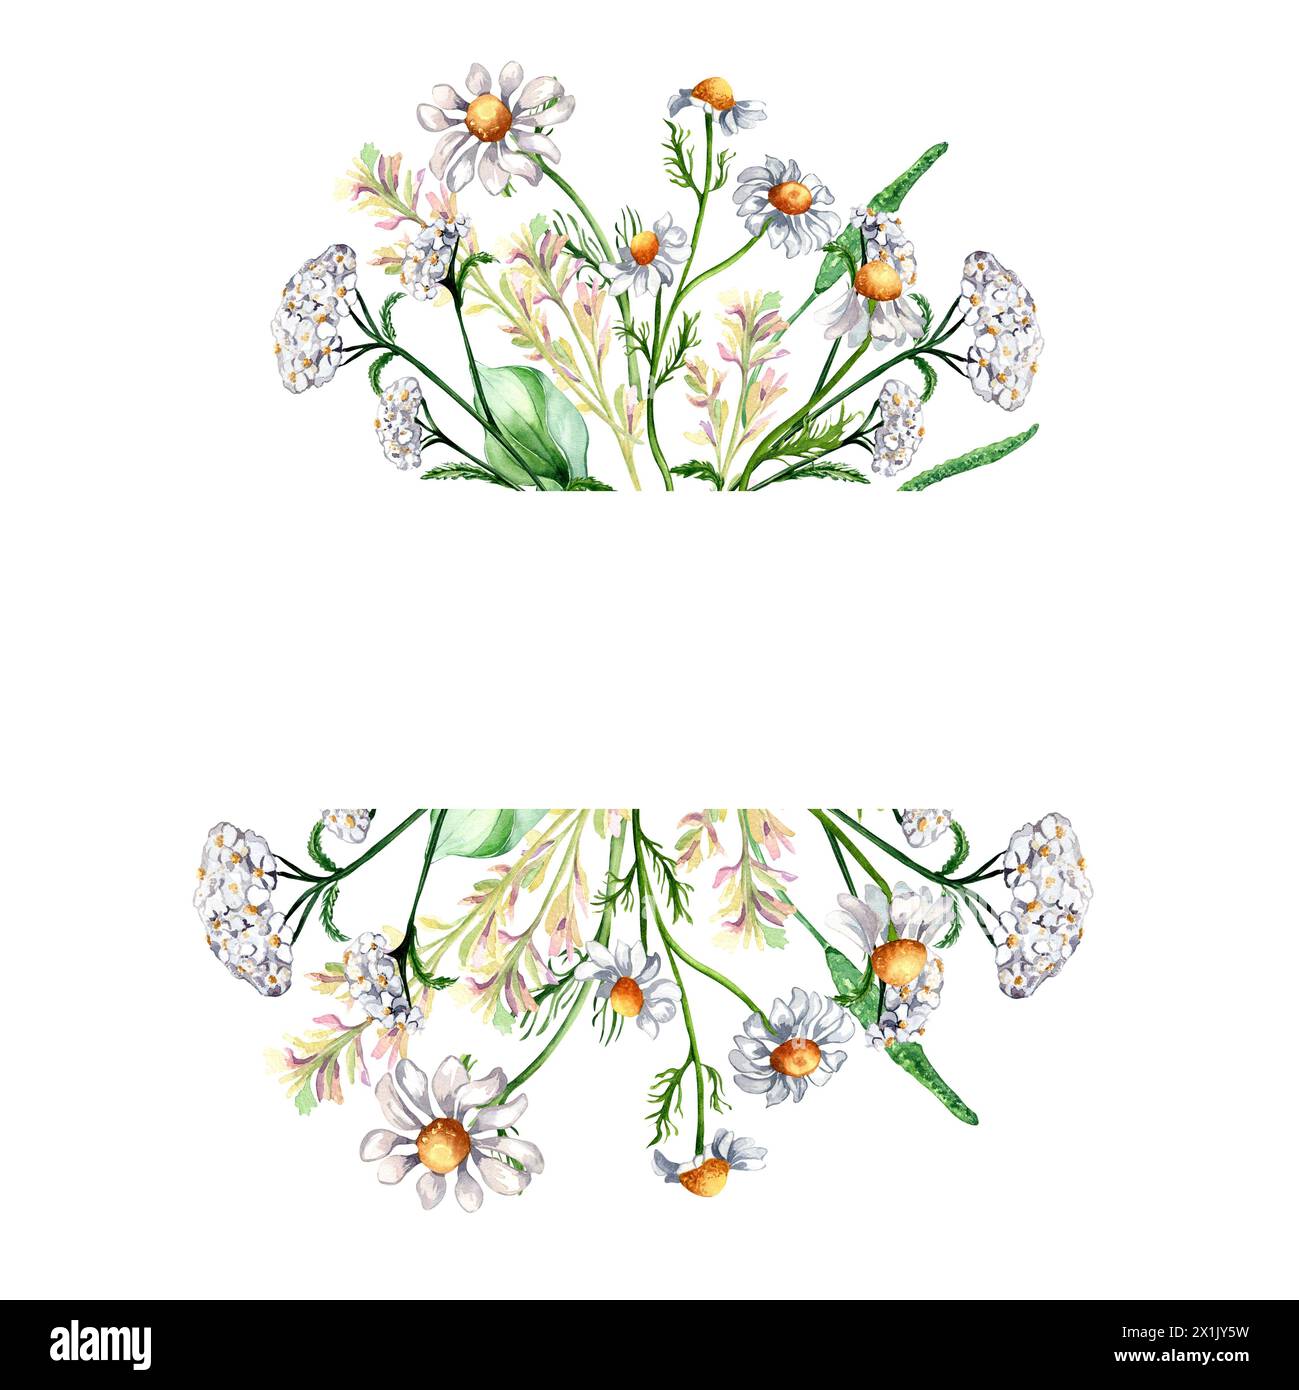 Frame of meadow medicinal flower, herb plants watercolor illustration isolated on white background. Chamomile, plantain, achillea yarrow in botanical Stock Photo